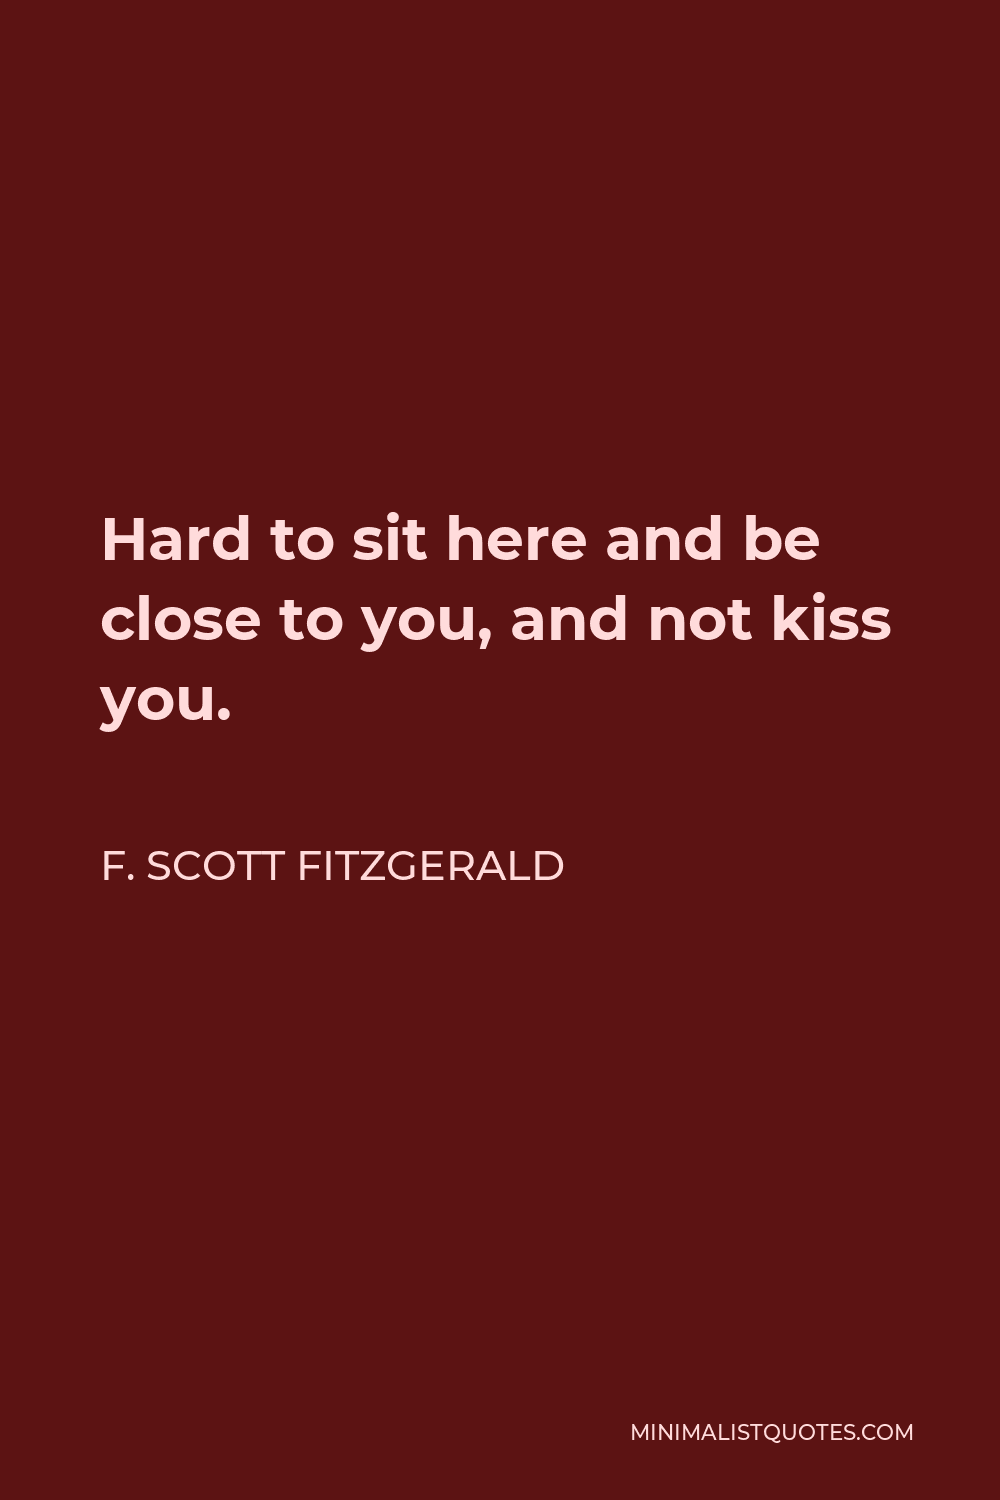 F. Scott Fitzgerald Quote - Hard to sit here and be close to you, and not kiss you.